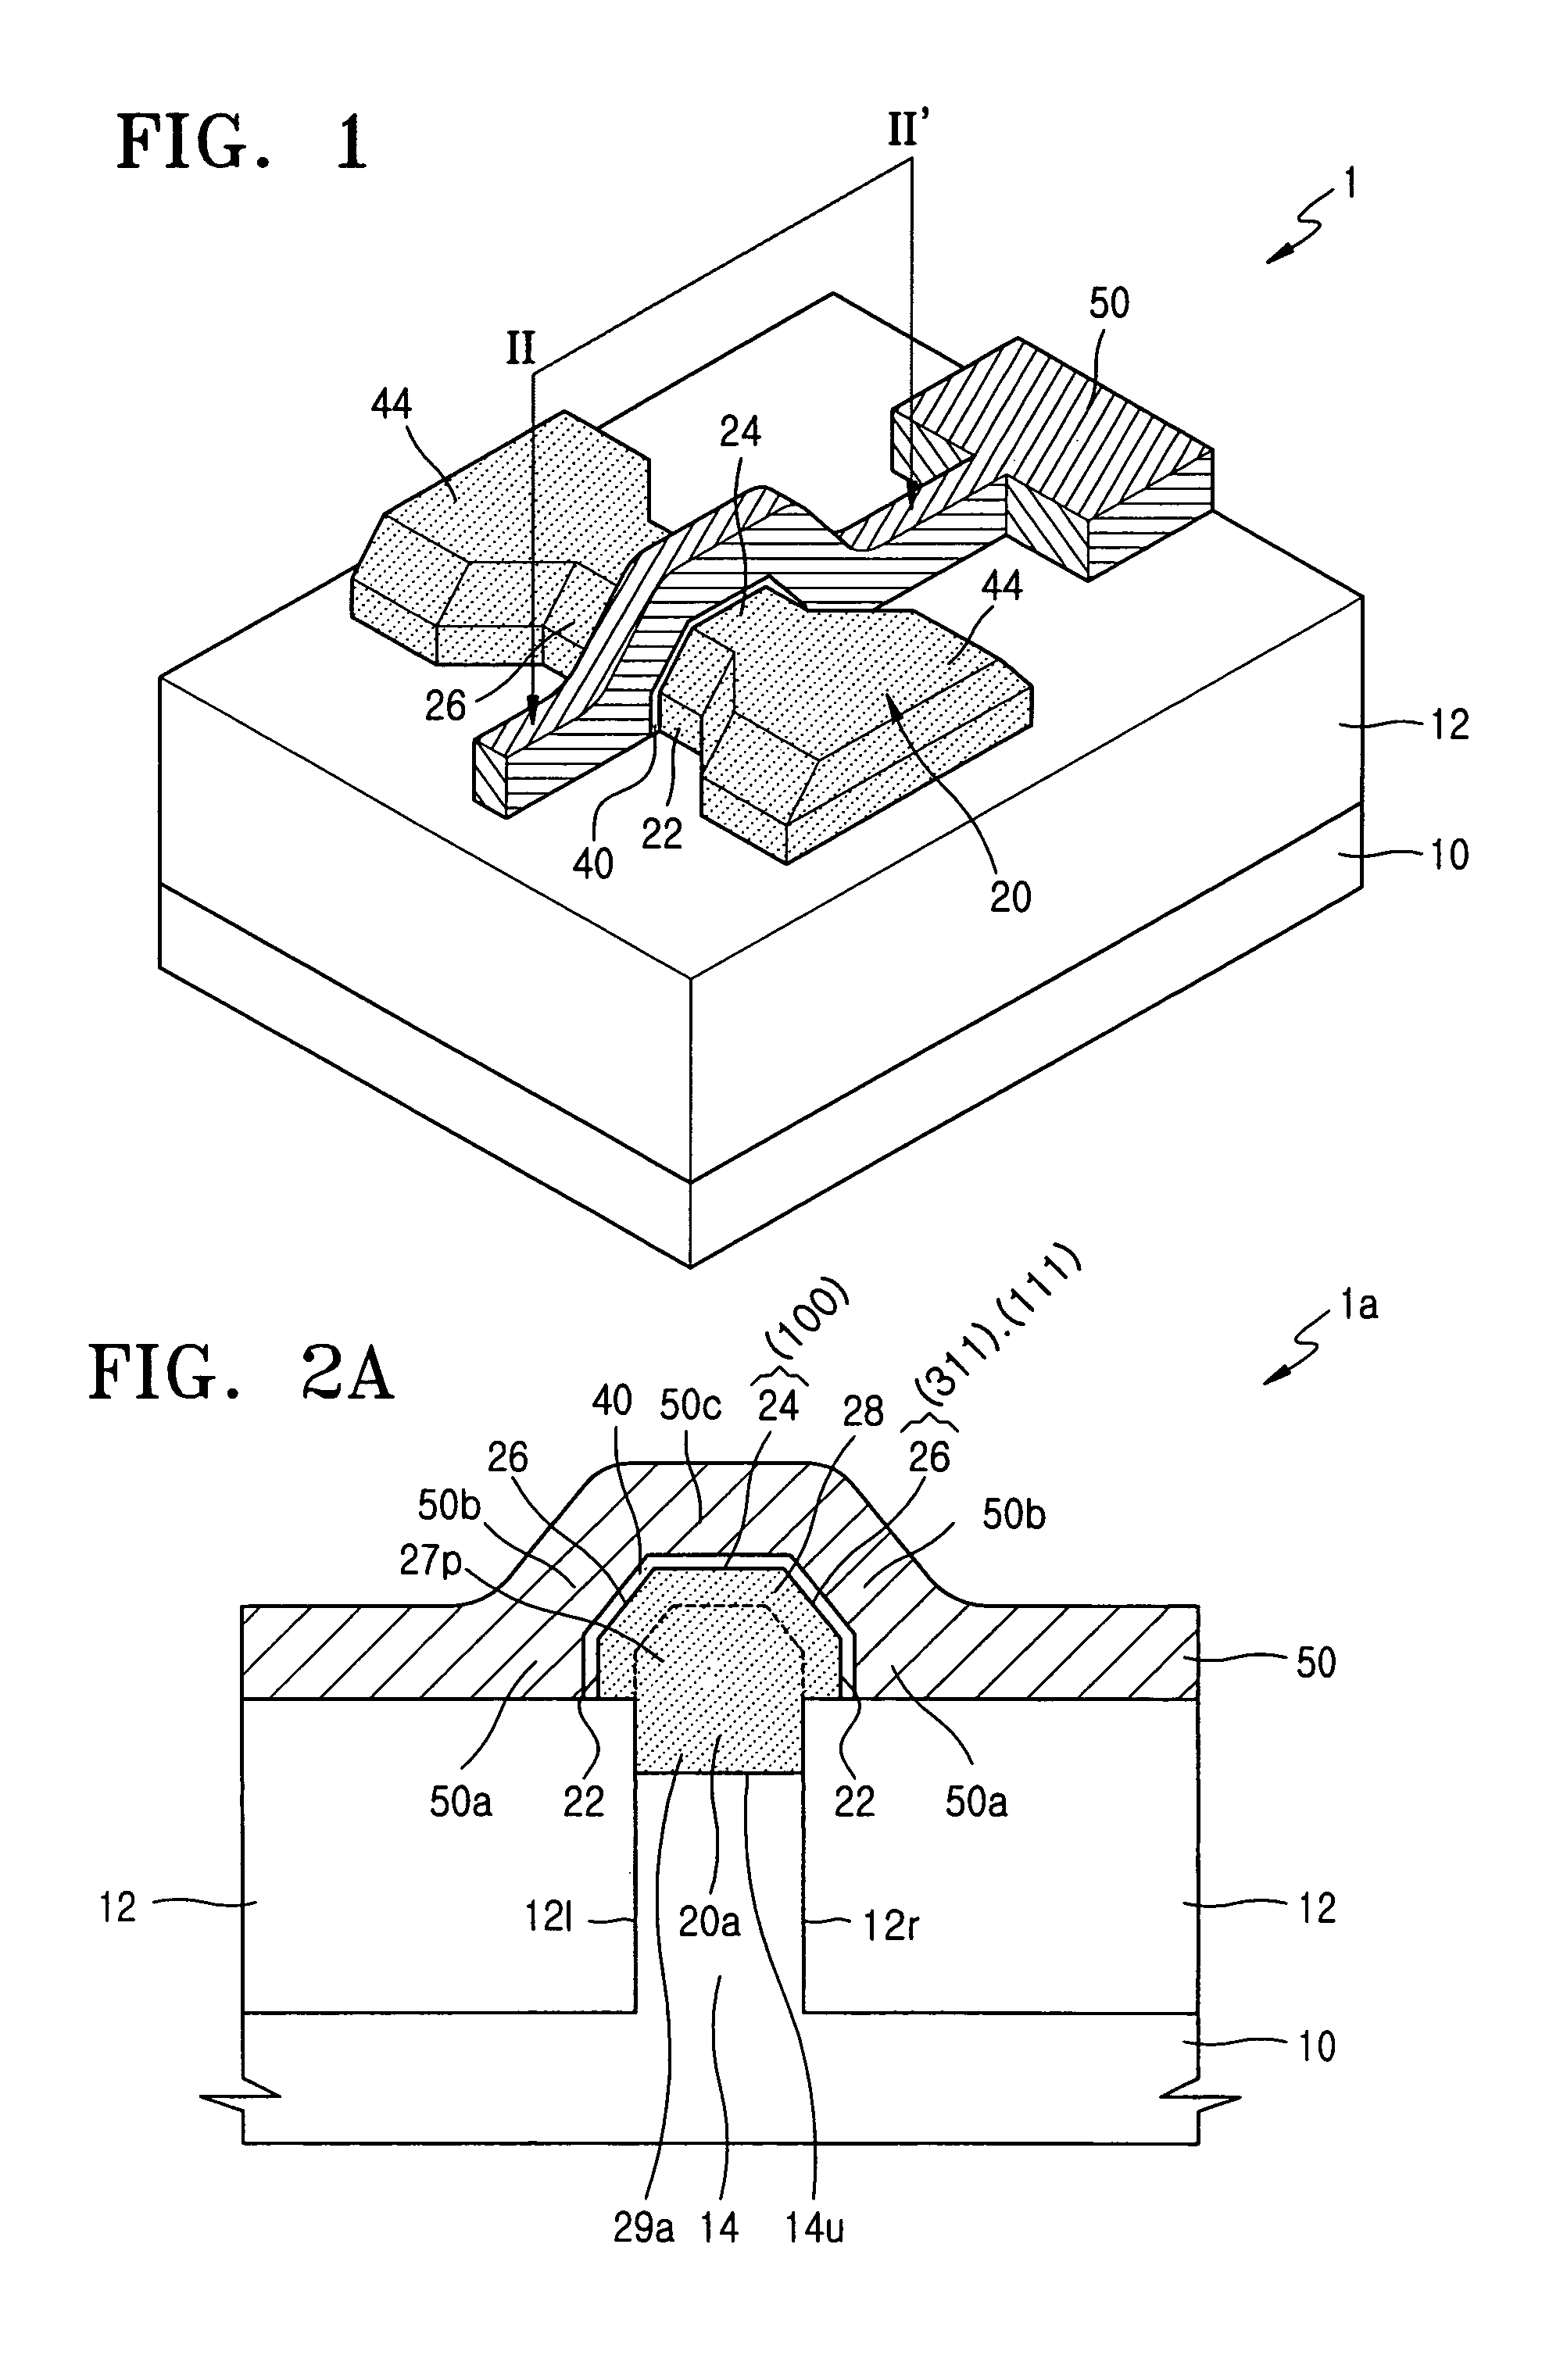 At least penta-sided-channel type of FinFET transistor